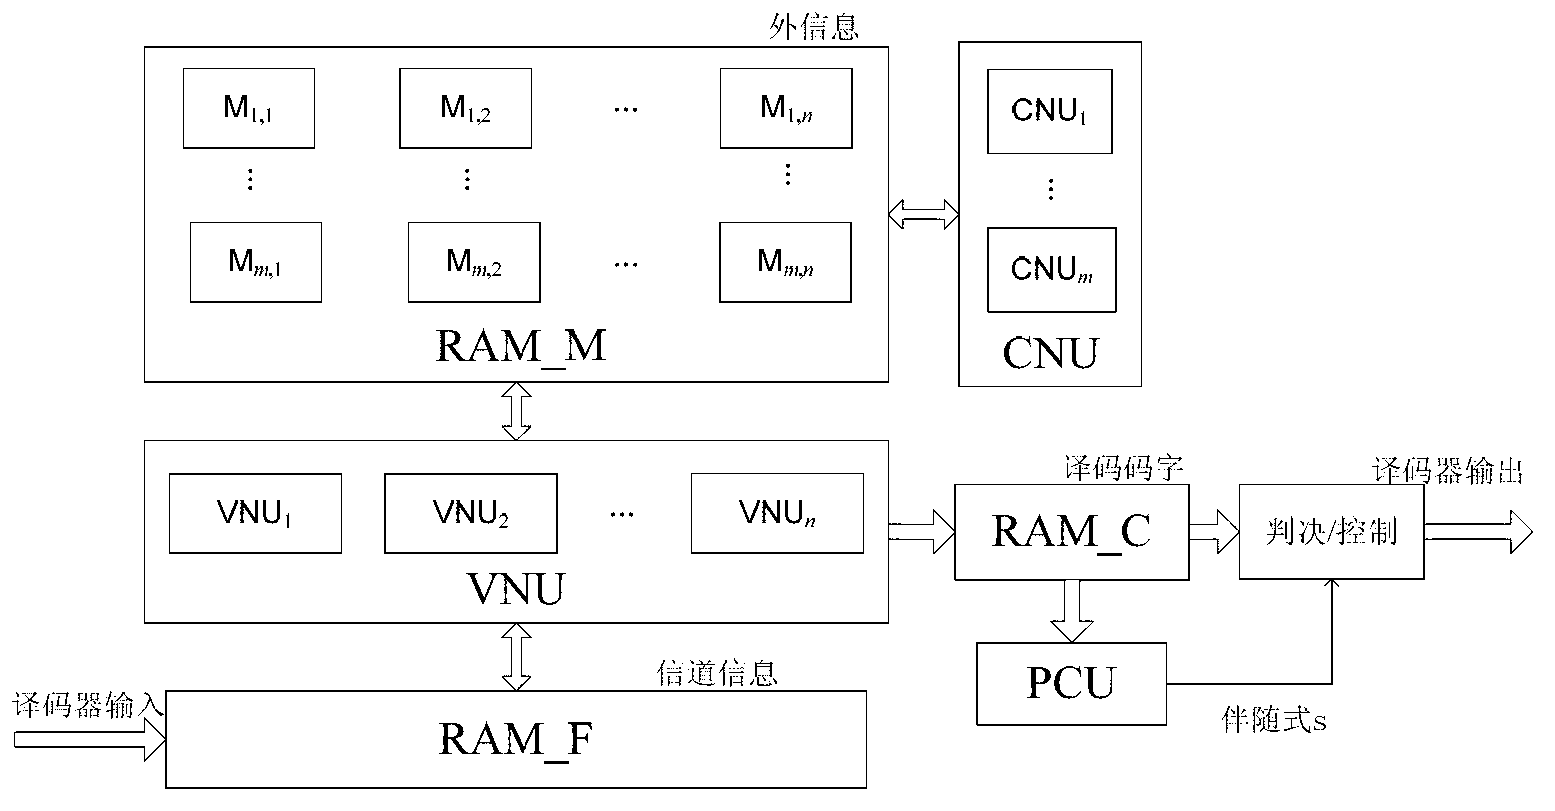 Realization method for QC-LDPC (Quasi-Cyclic Low-Density Parity-Check) decoder for improving node processing parallelism